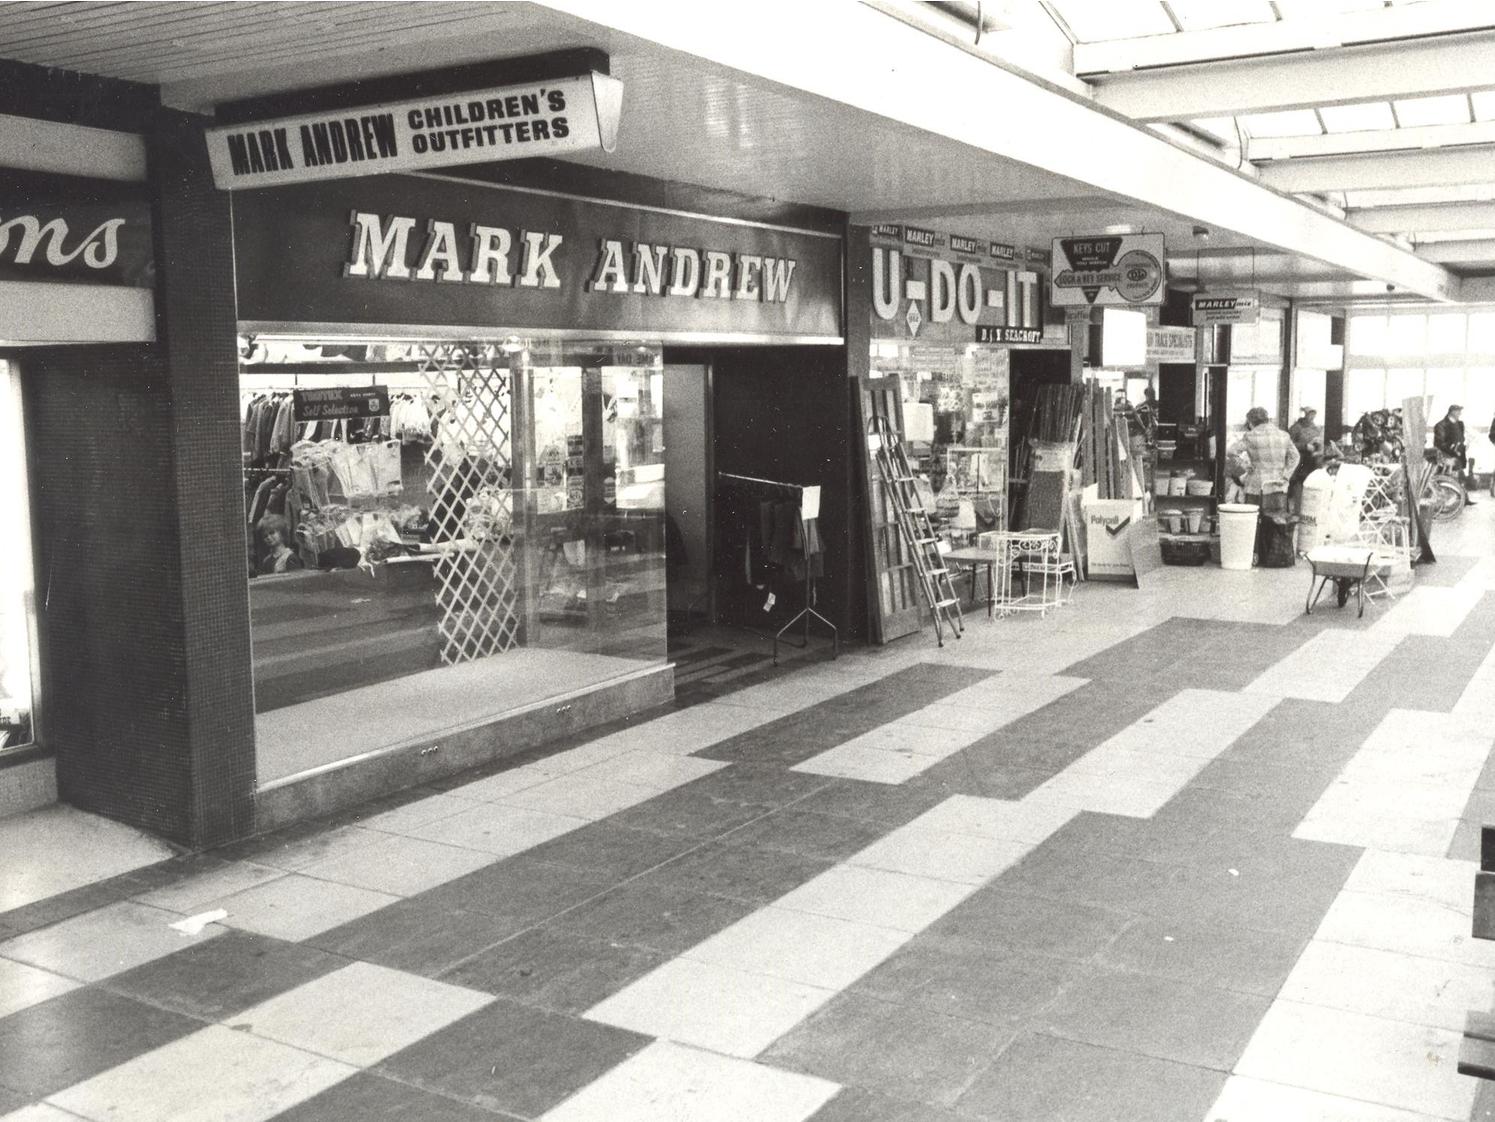 Did you visit these shops at Seacroft Shopping Centre back in the day?